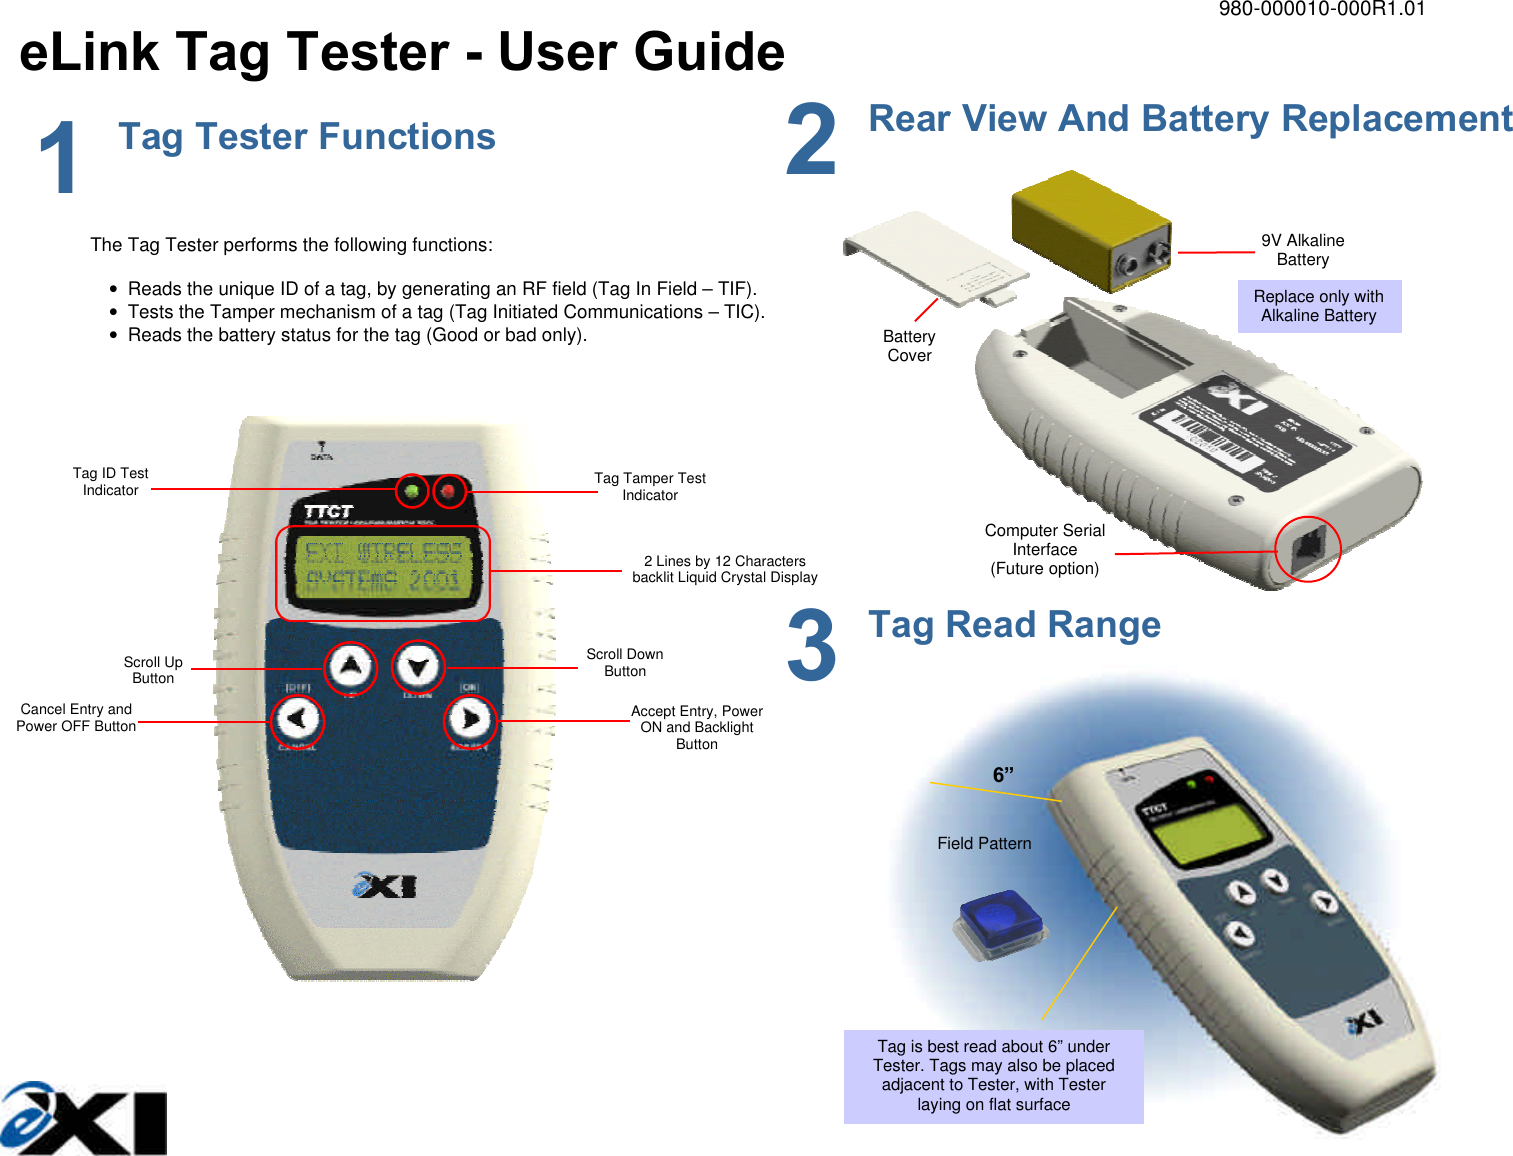         980-000010-000R1.01 eLink Tag Tester - User Guide               Computer Serial Interface (Future option) 9V Alkaline Battery Battery Cover Replace only with Alkaline Battery 1 Tag Tester Functions  2 Rear View And Battery Replacement The Tag Tester performs the following functions:  • Reads the unique ID of a tag, by generating an RF field (Tag In Field – TIF). • Tests the Tamper mechanism of a tag (Tag Initiated Communications – TIC). • Reads the battery status for the tag (Good or bad only).  Tag Tamper Test Indicator 2 Lines by 12 Characters backlit Liquid Crystal Display Scroll Down Button Scroll Up Button Cancel Entry and Power OFF Button Accept Entry, Power ON and Backlight Button Tag ID Test Indicator  6” Field Pattern Tag is best read about 6” under Tester. Tags may also be placed adjacent to Tester, with Tester laying on flat surface 3 Tag Read Range 